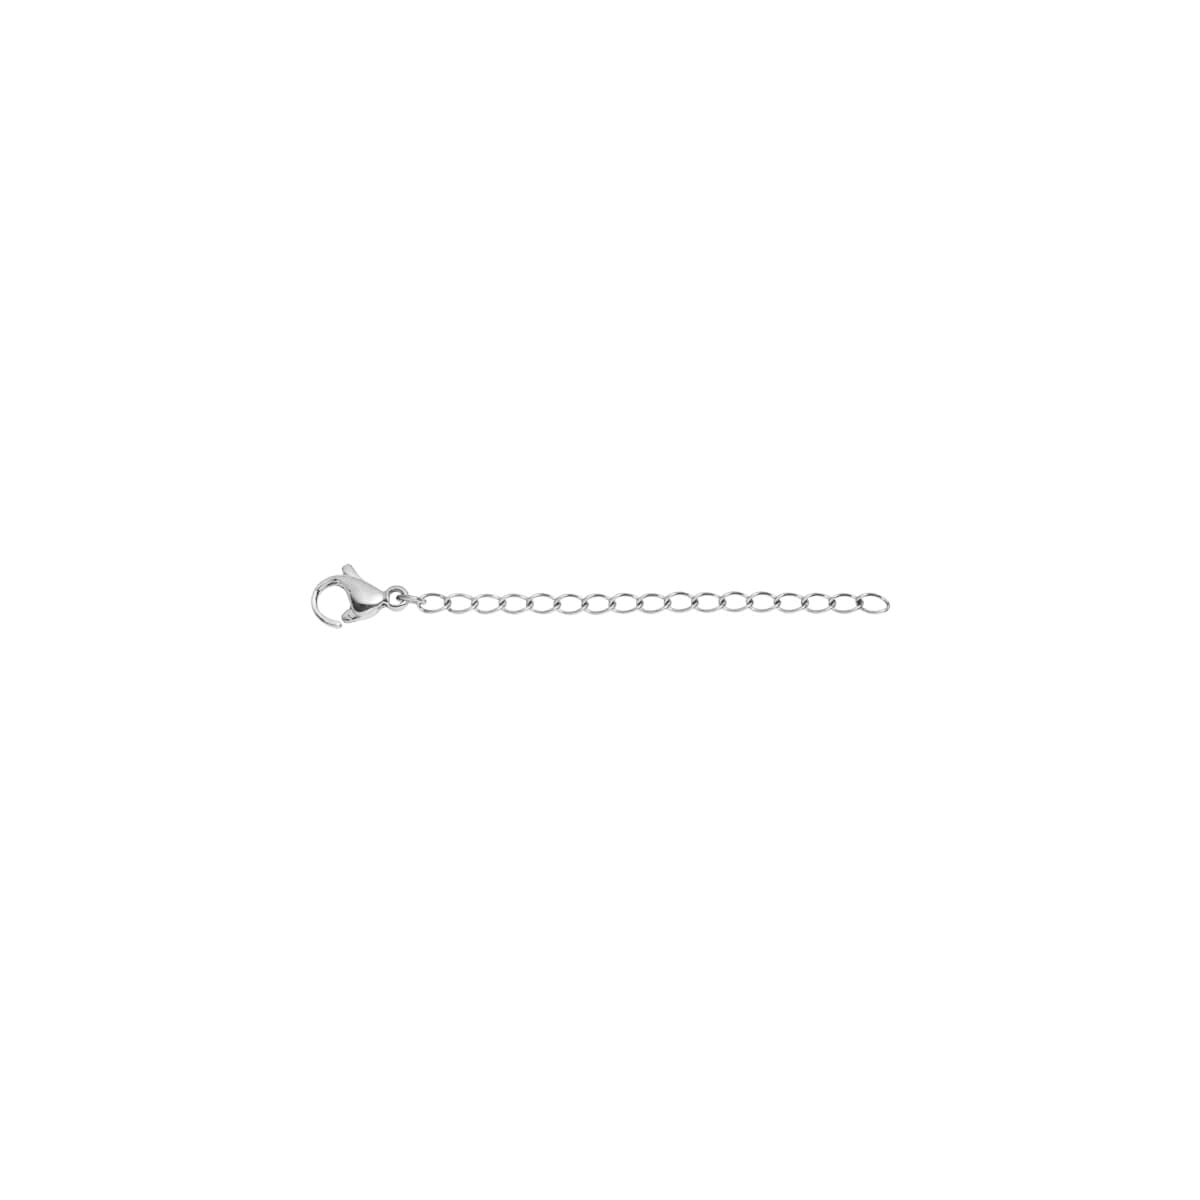 Necklace Extenders, Silver Plated Chain Extenders For Necklaces, Silver  Necklaces Bracelet Anklet Extender For Women Jewelry Making